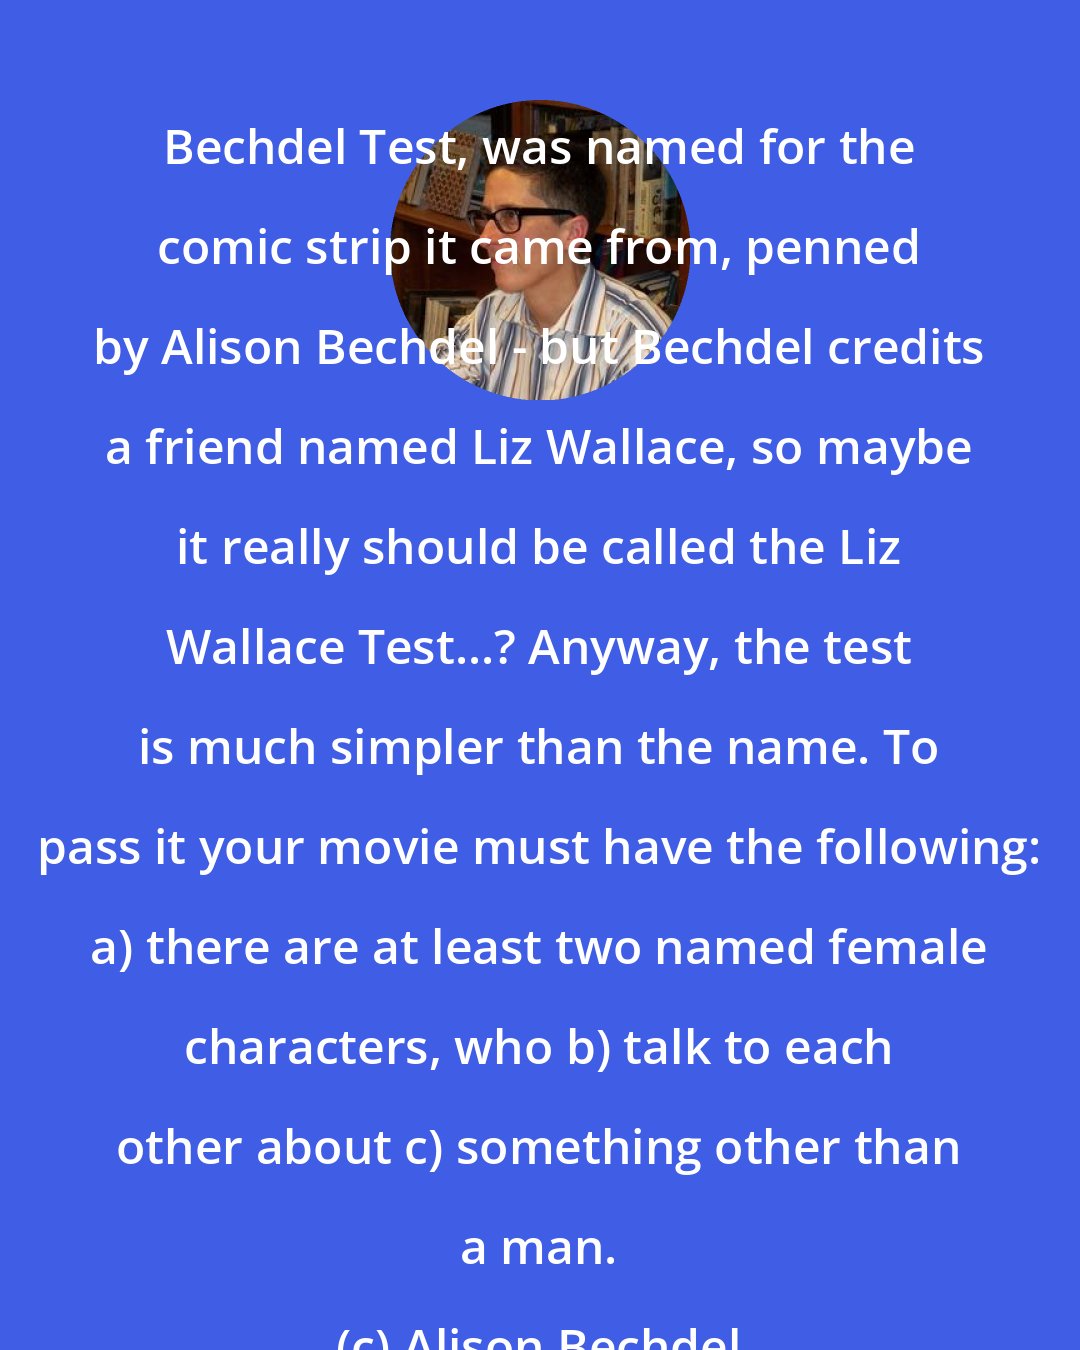 Alison Bechdel: Bechdel Test, was named for the comic strip it came from, penned by Alison Bechdel - but Bechdel credits a friend named Liz Wallace, so maybe it really should be called the Liz Wallace Test...? Anyway, the test is much simpler than the name. To pass it your movie must have the following: a) there are at least two named female characters, who b) talk to each other about c) something other than a man.